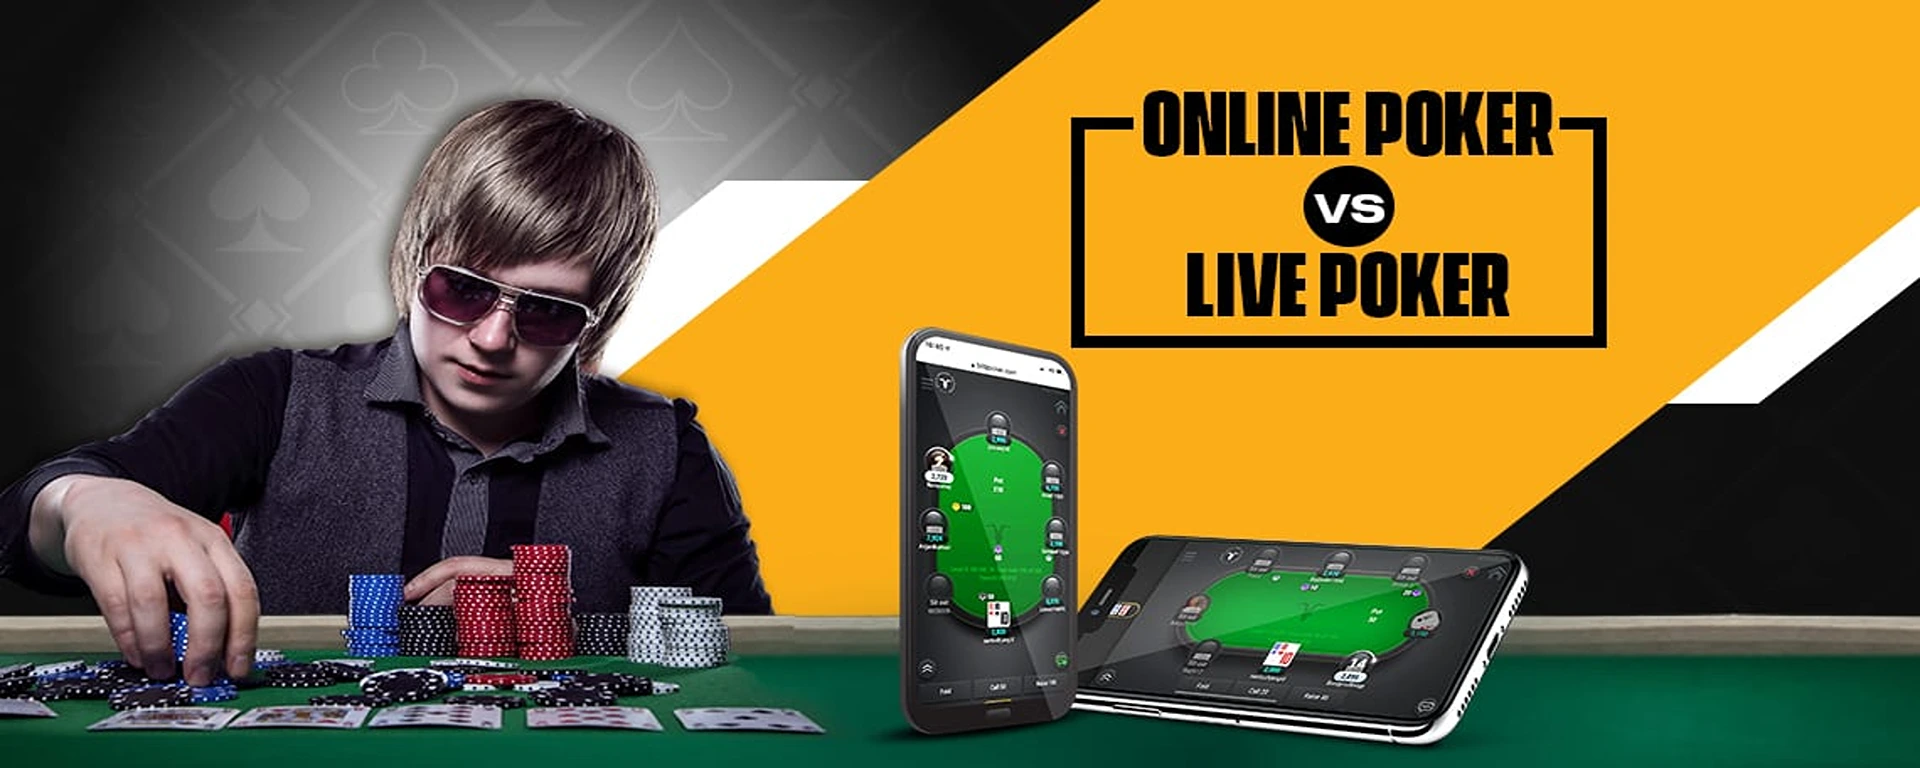 What Are The Differences Between Live Poker And Online Poker